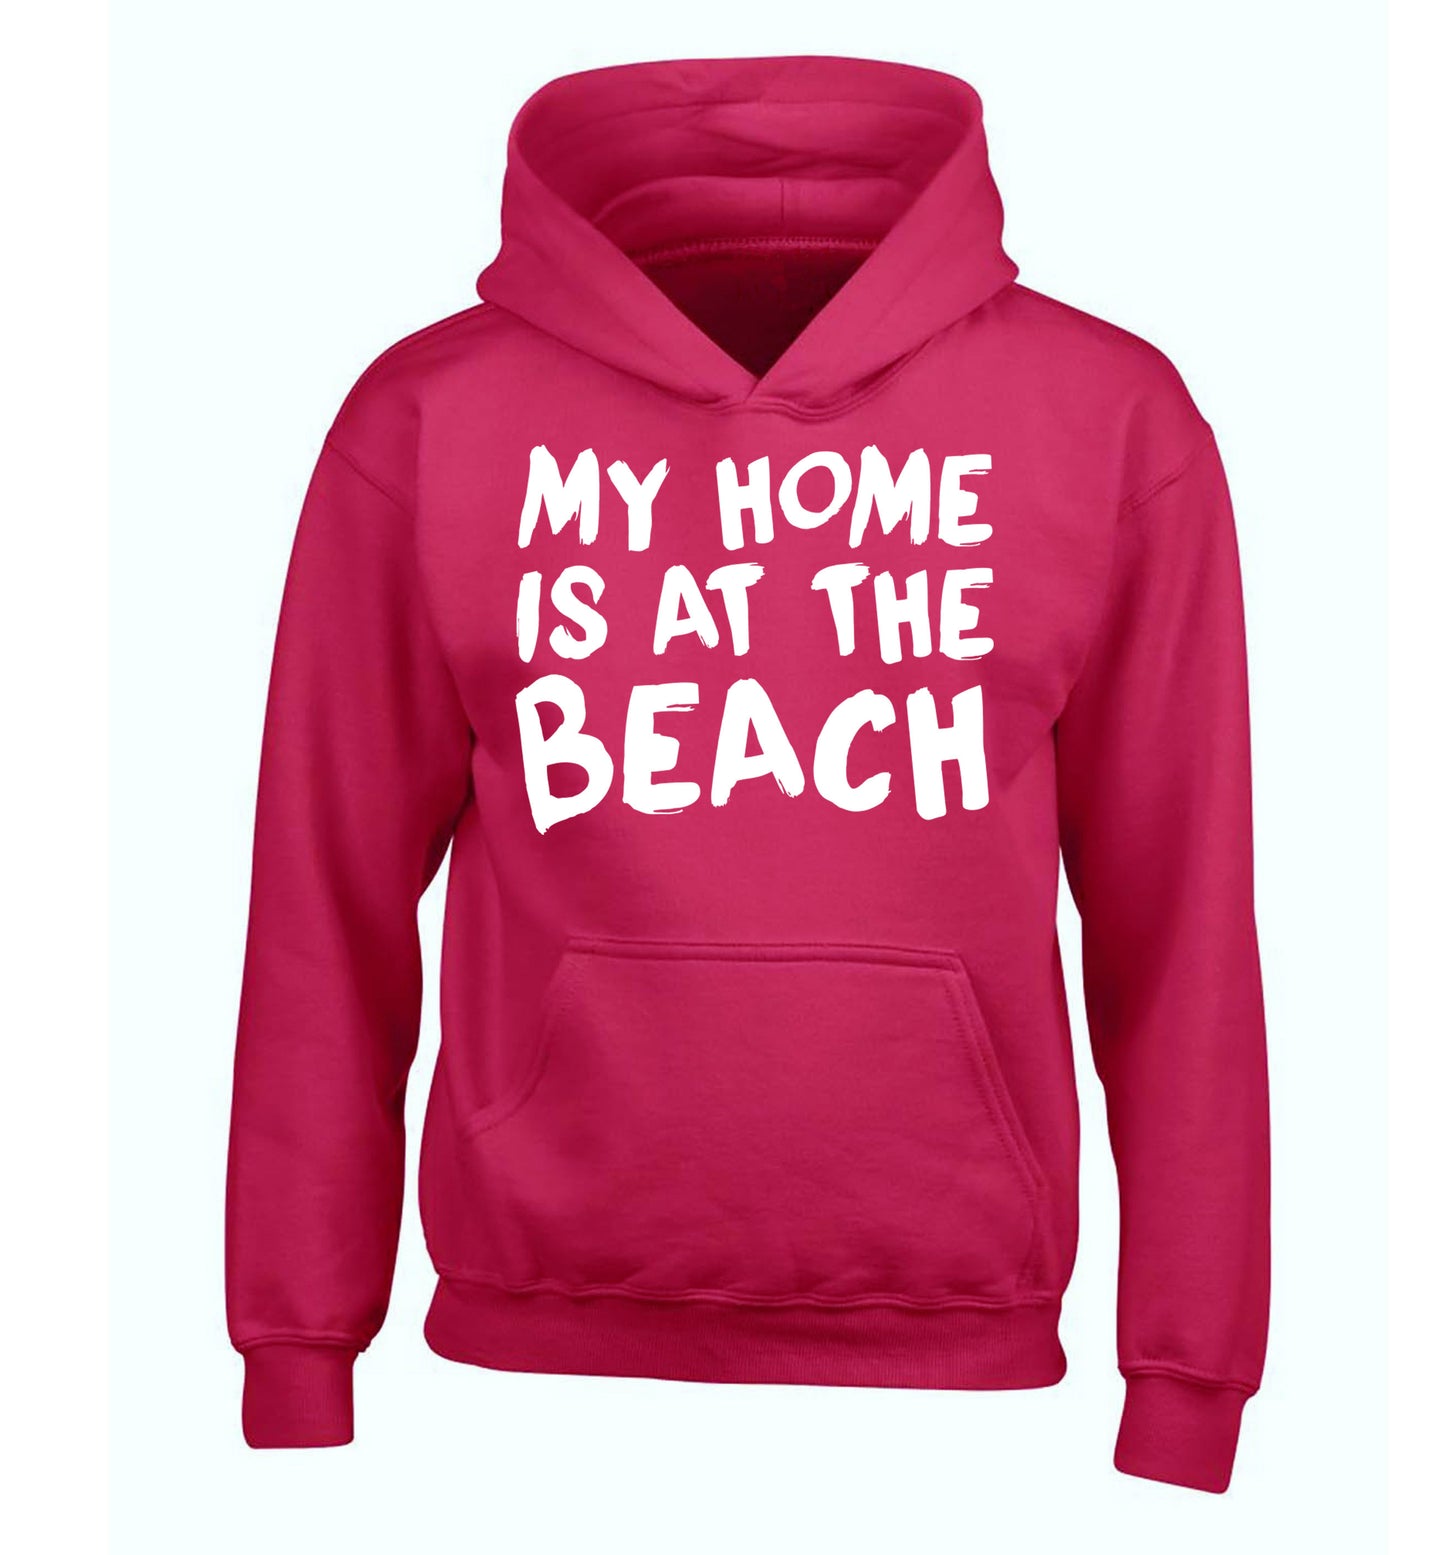 My home is at the beach children's pink hoodie 12-14 Years